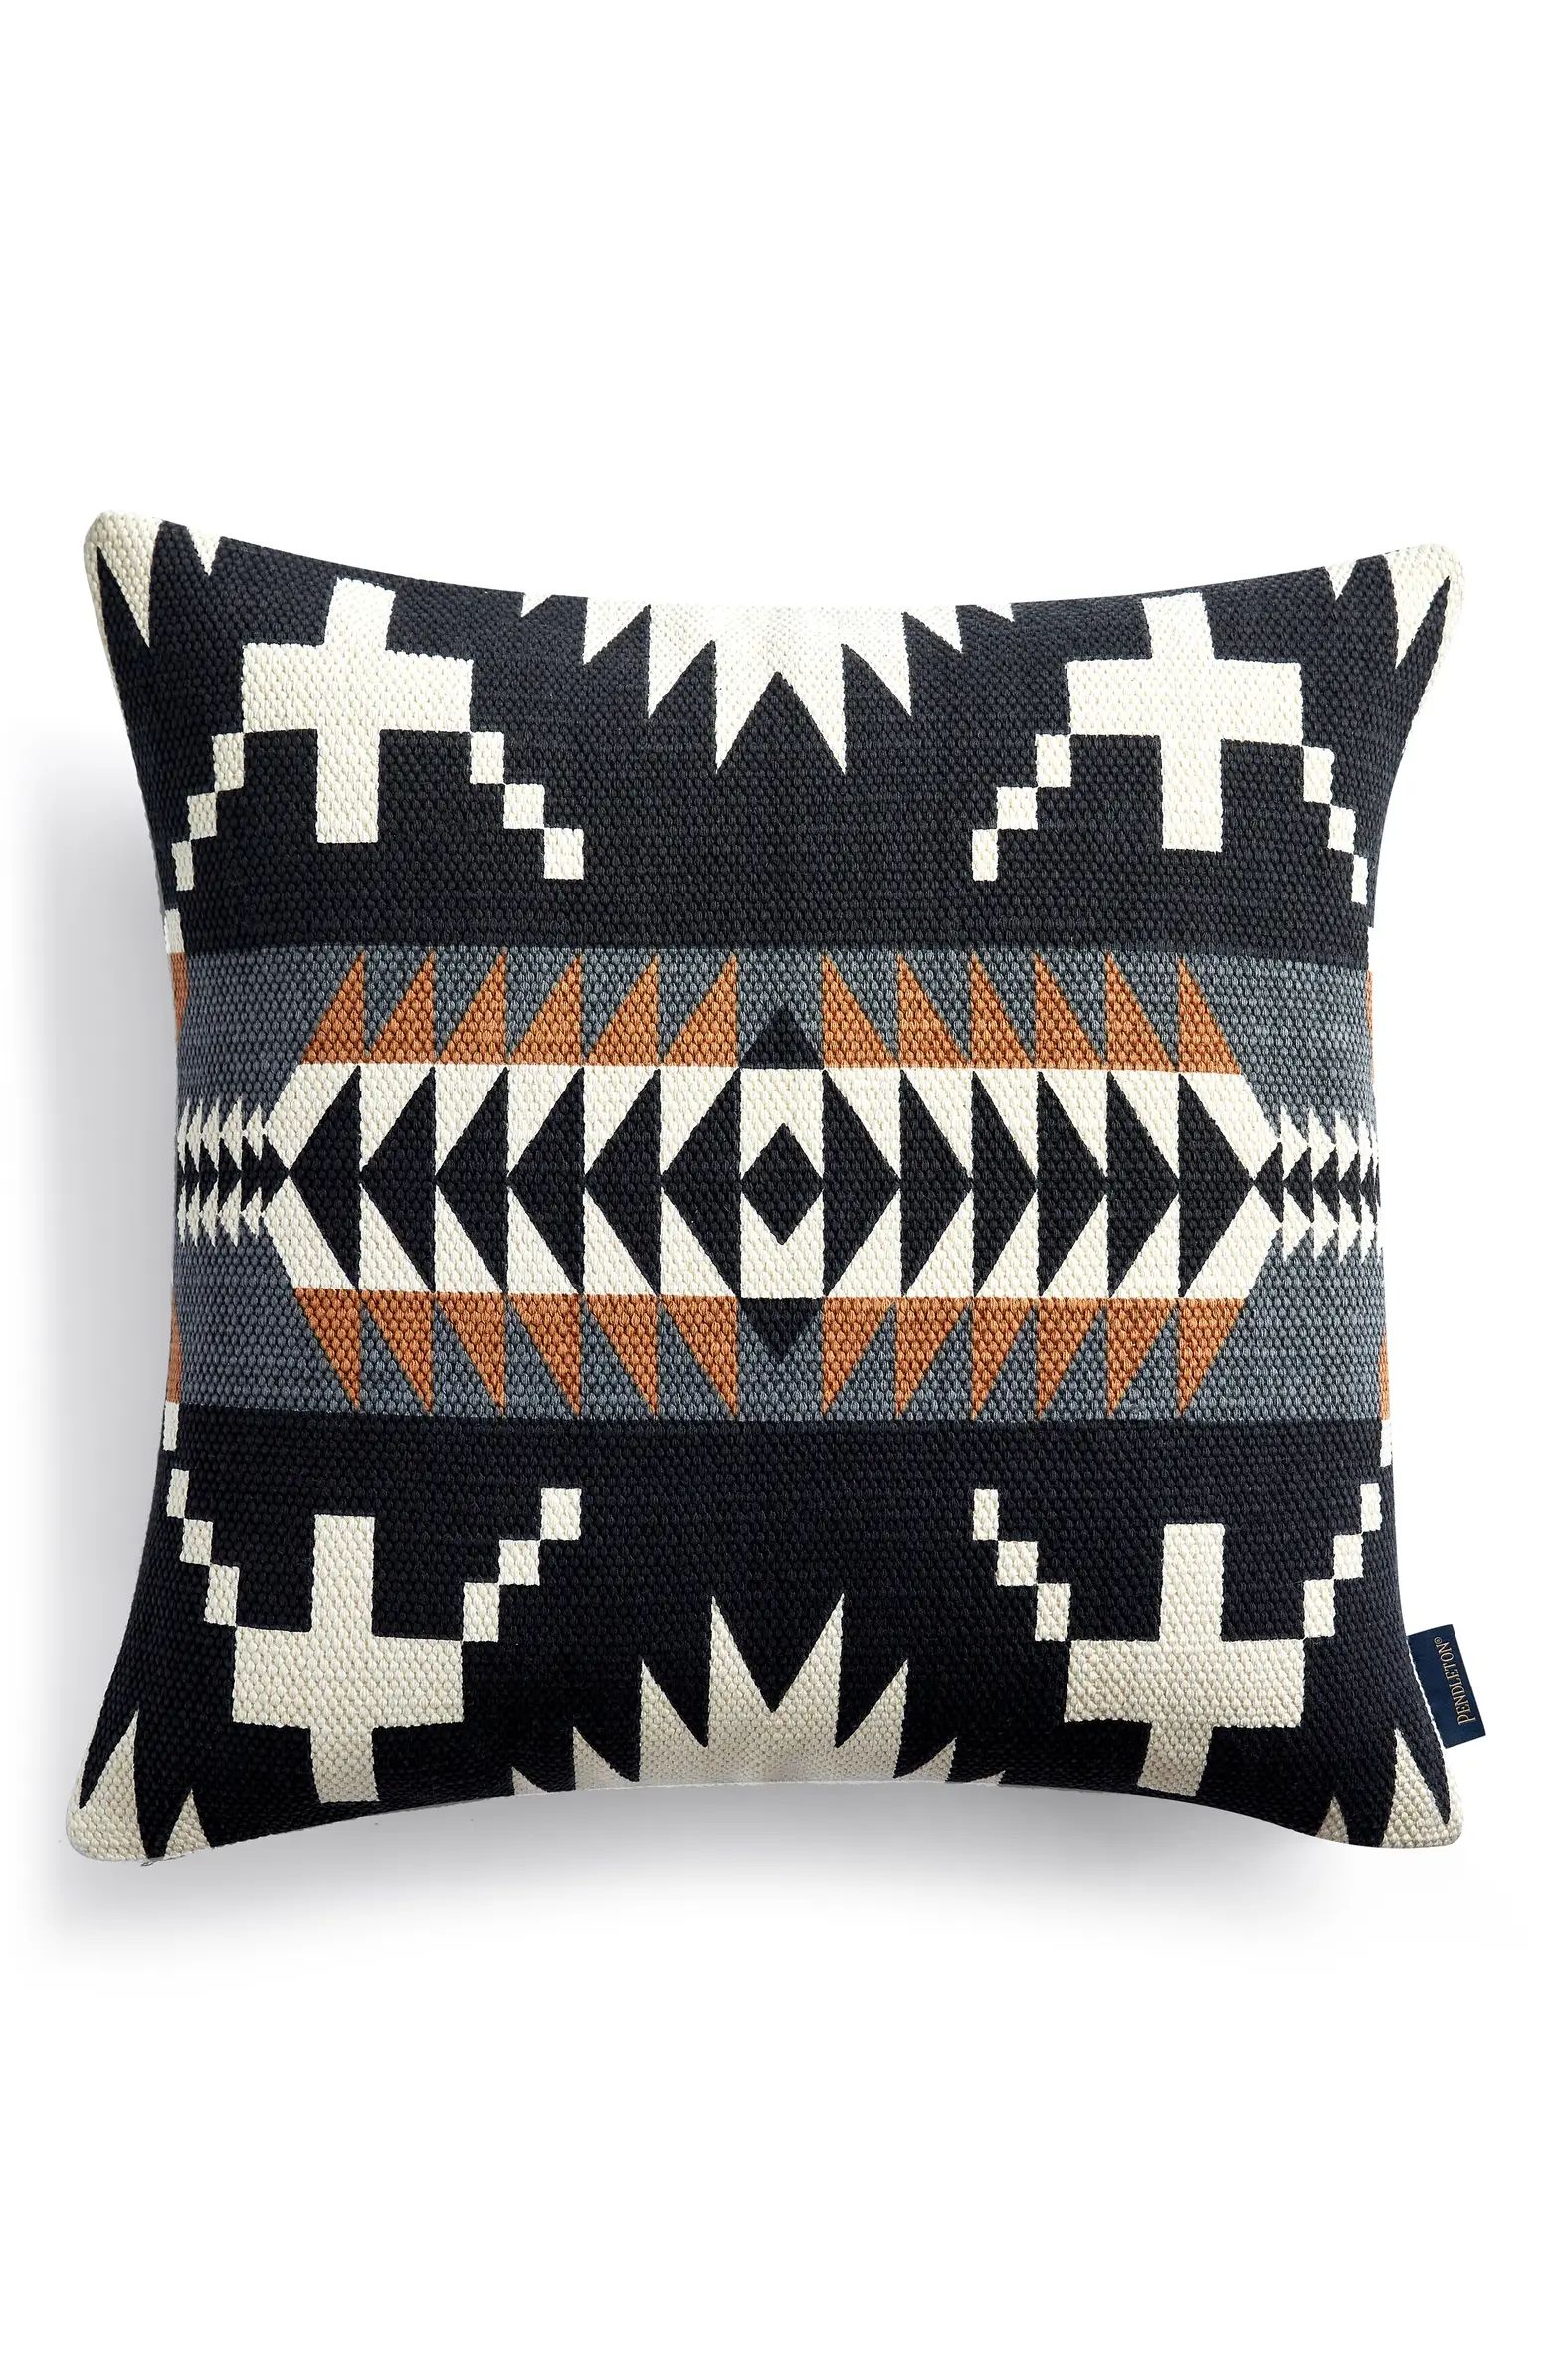 Spider Rock Accent Pillow | Nordstrom